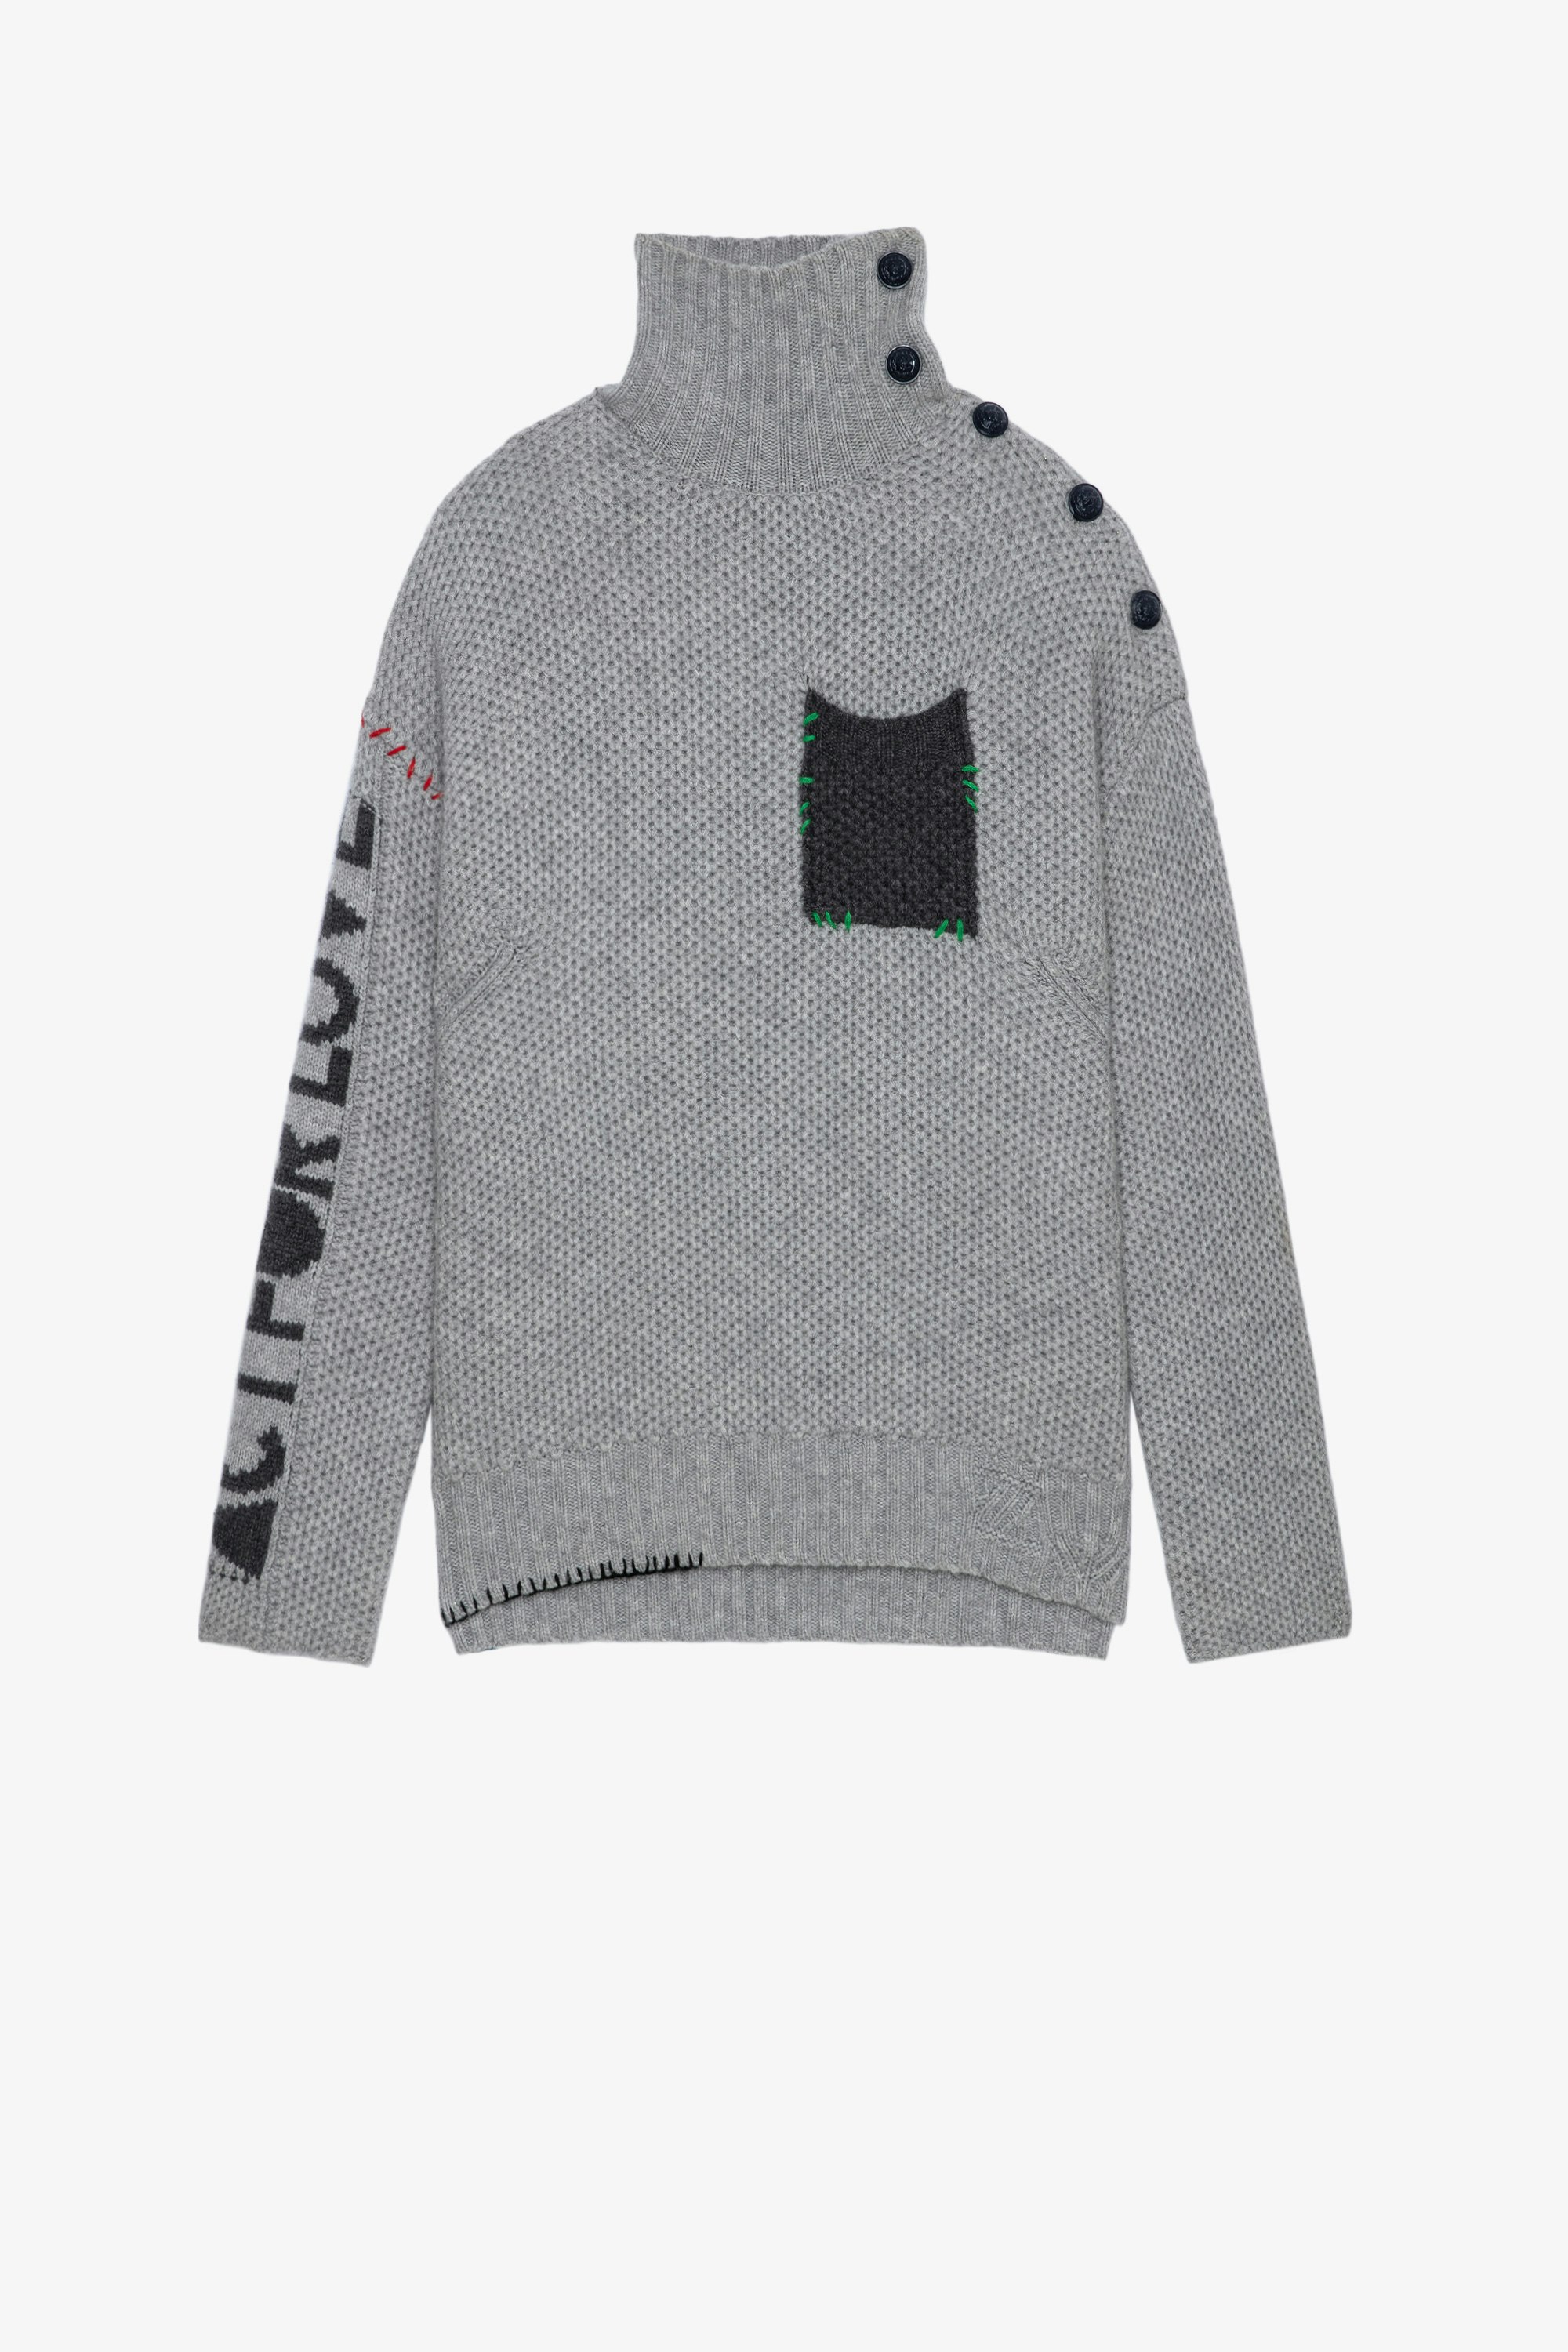 Alma カシミヤニット Women’s grey marl recycled cashmere jumper with high collar